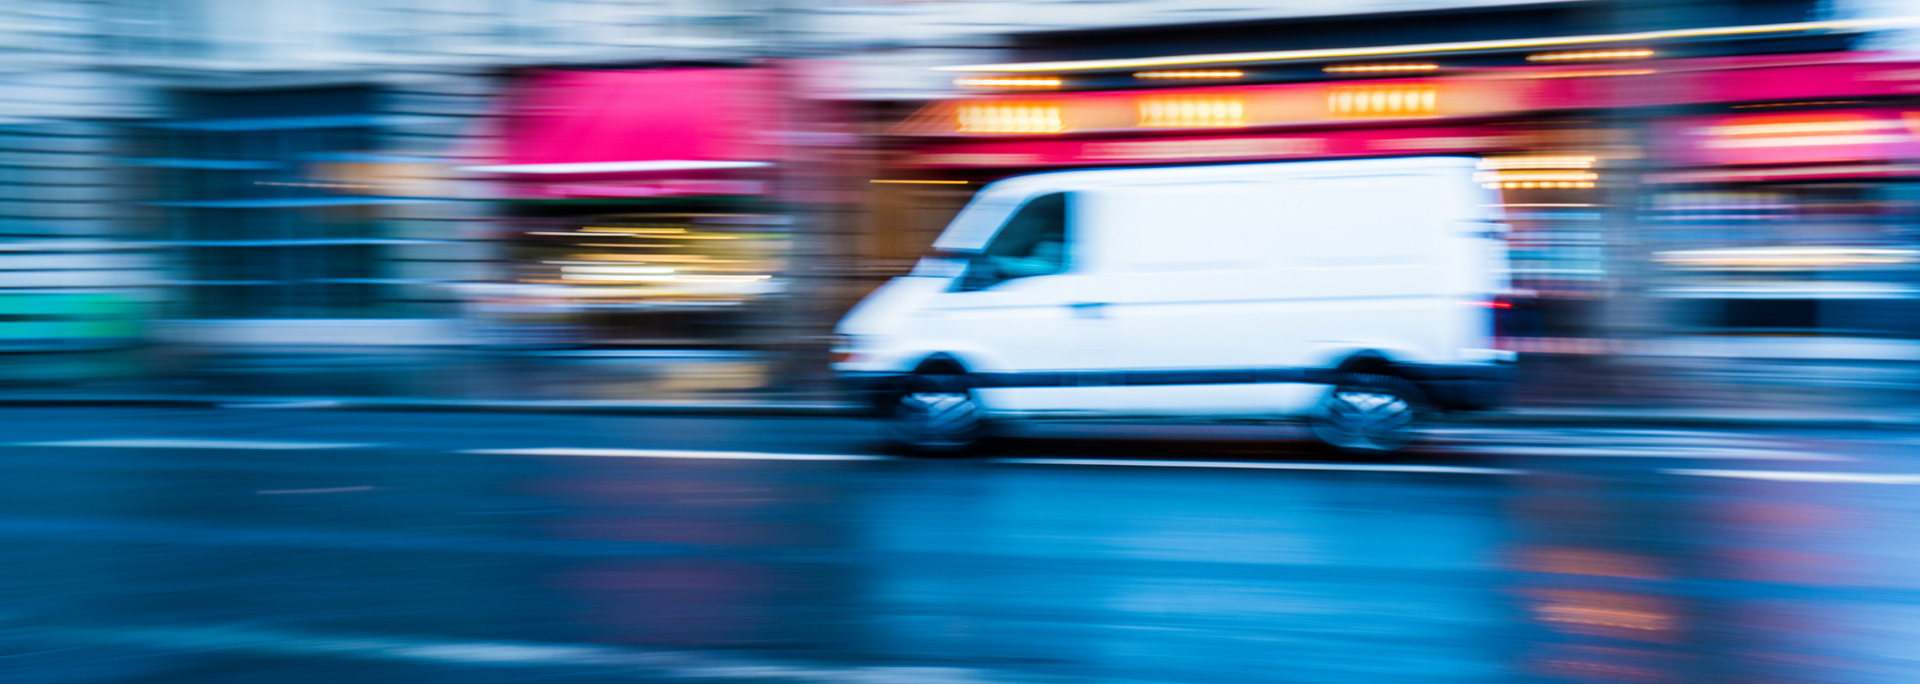 picture of a van being driven fast and carelessly